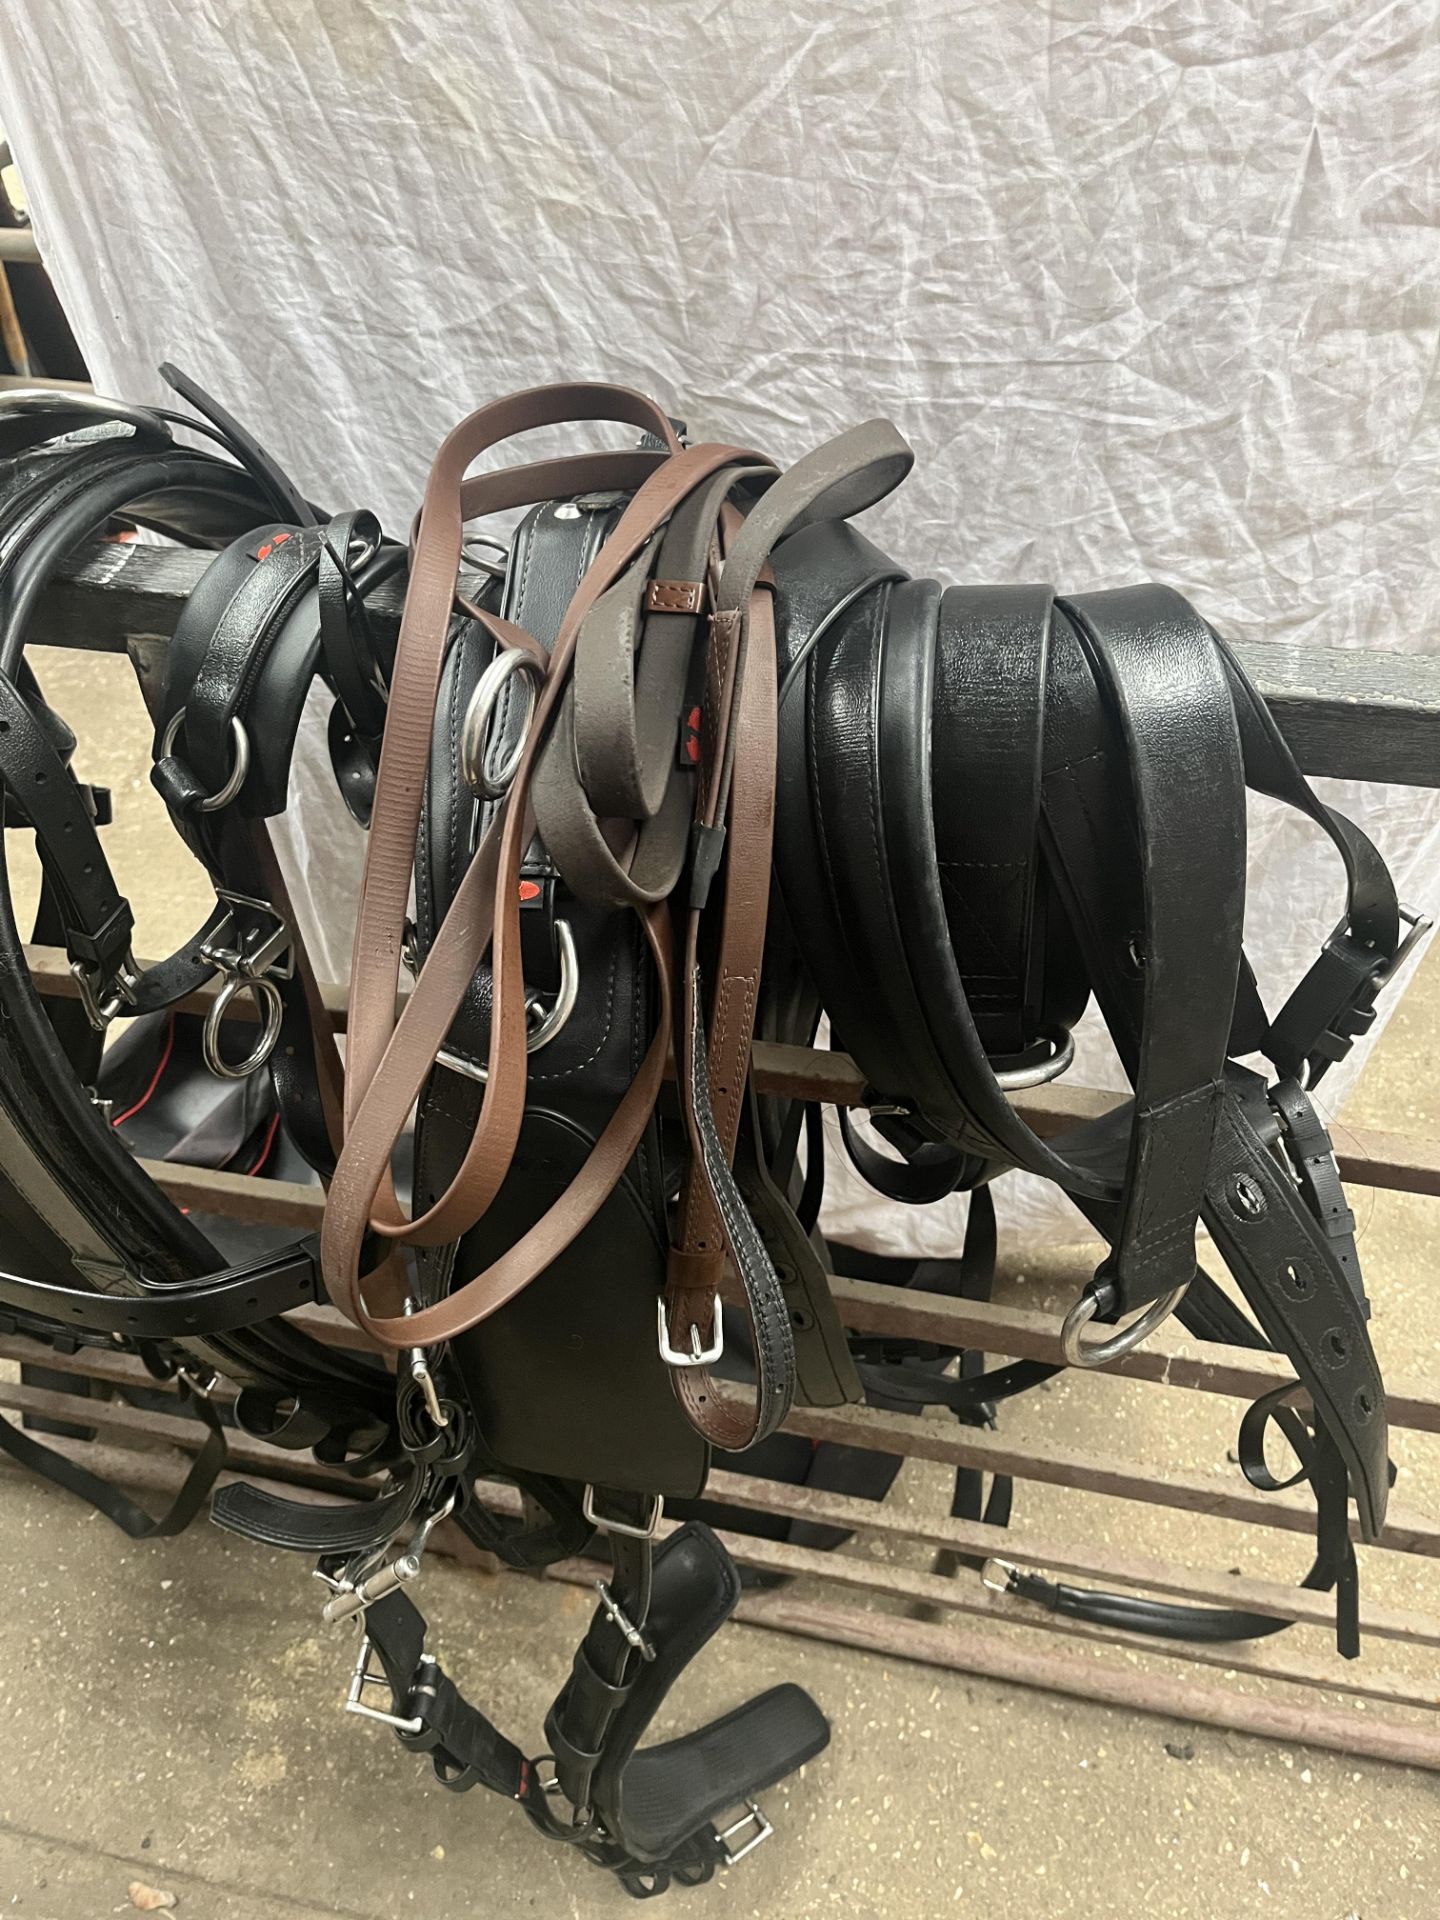 Full size classic Zilco pairs harness, complete set with harness bag - Image 3 of 5